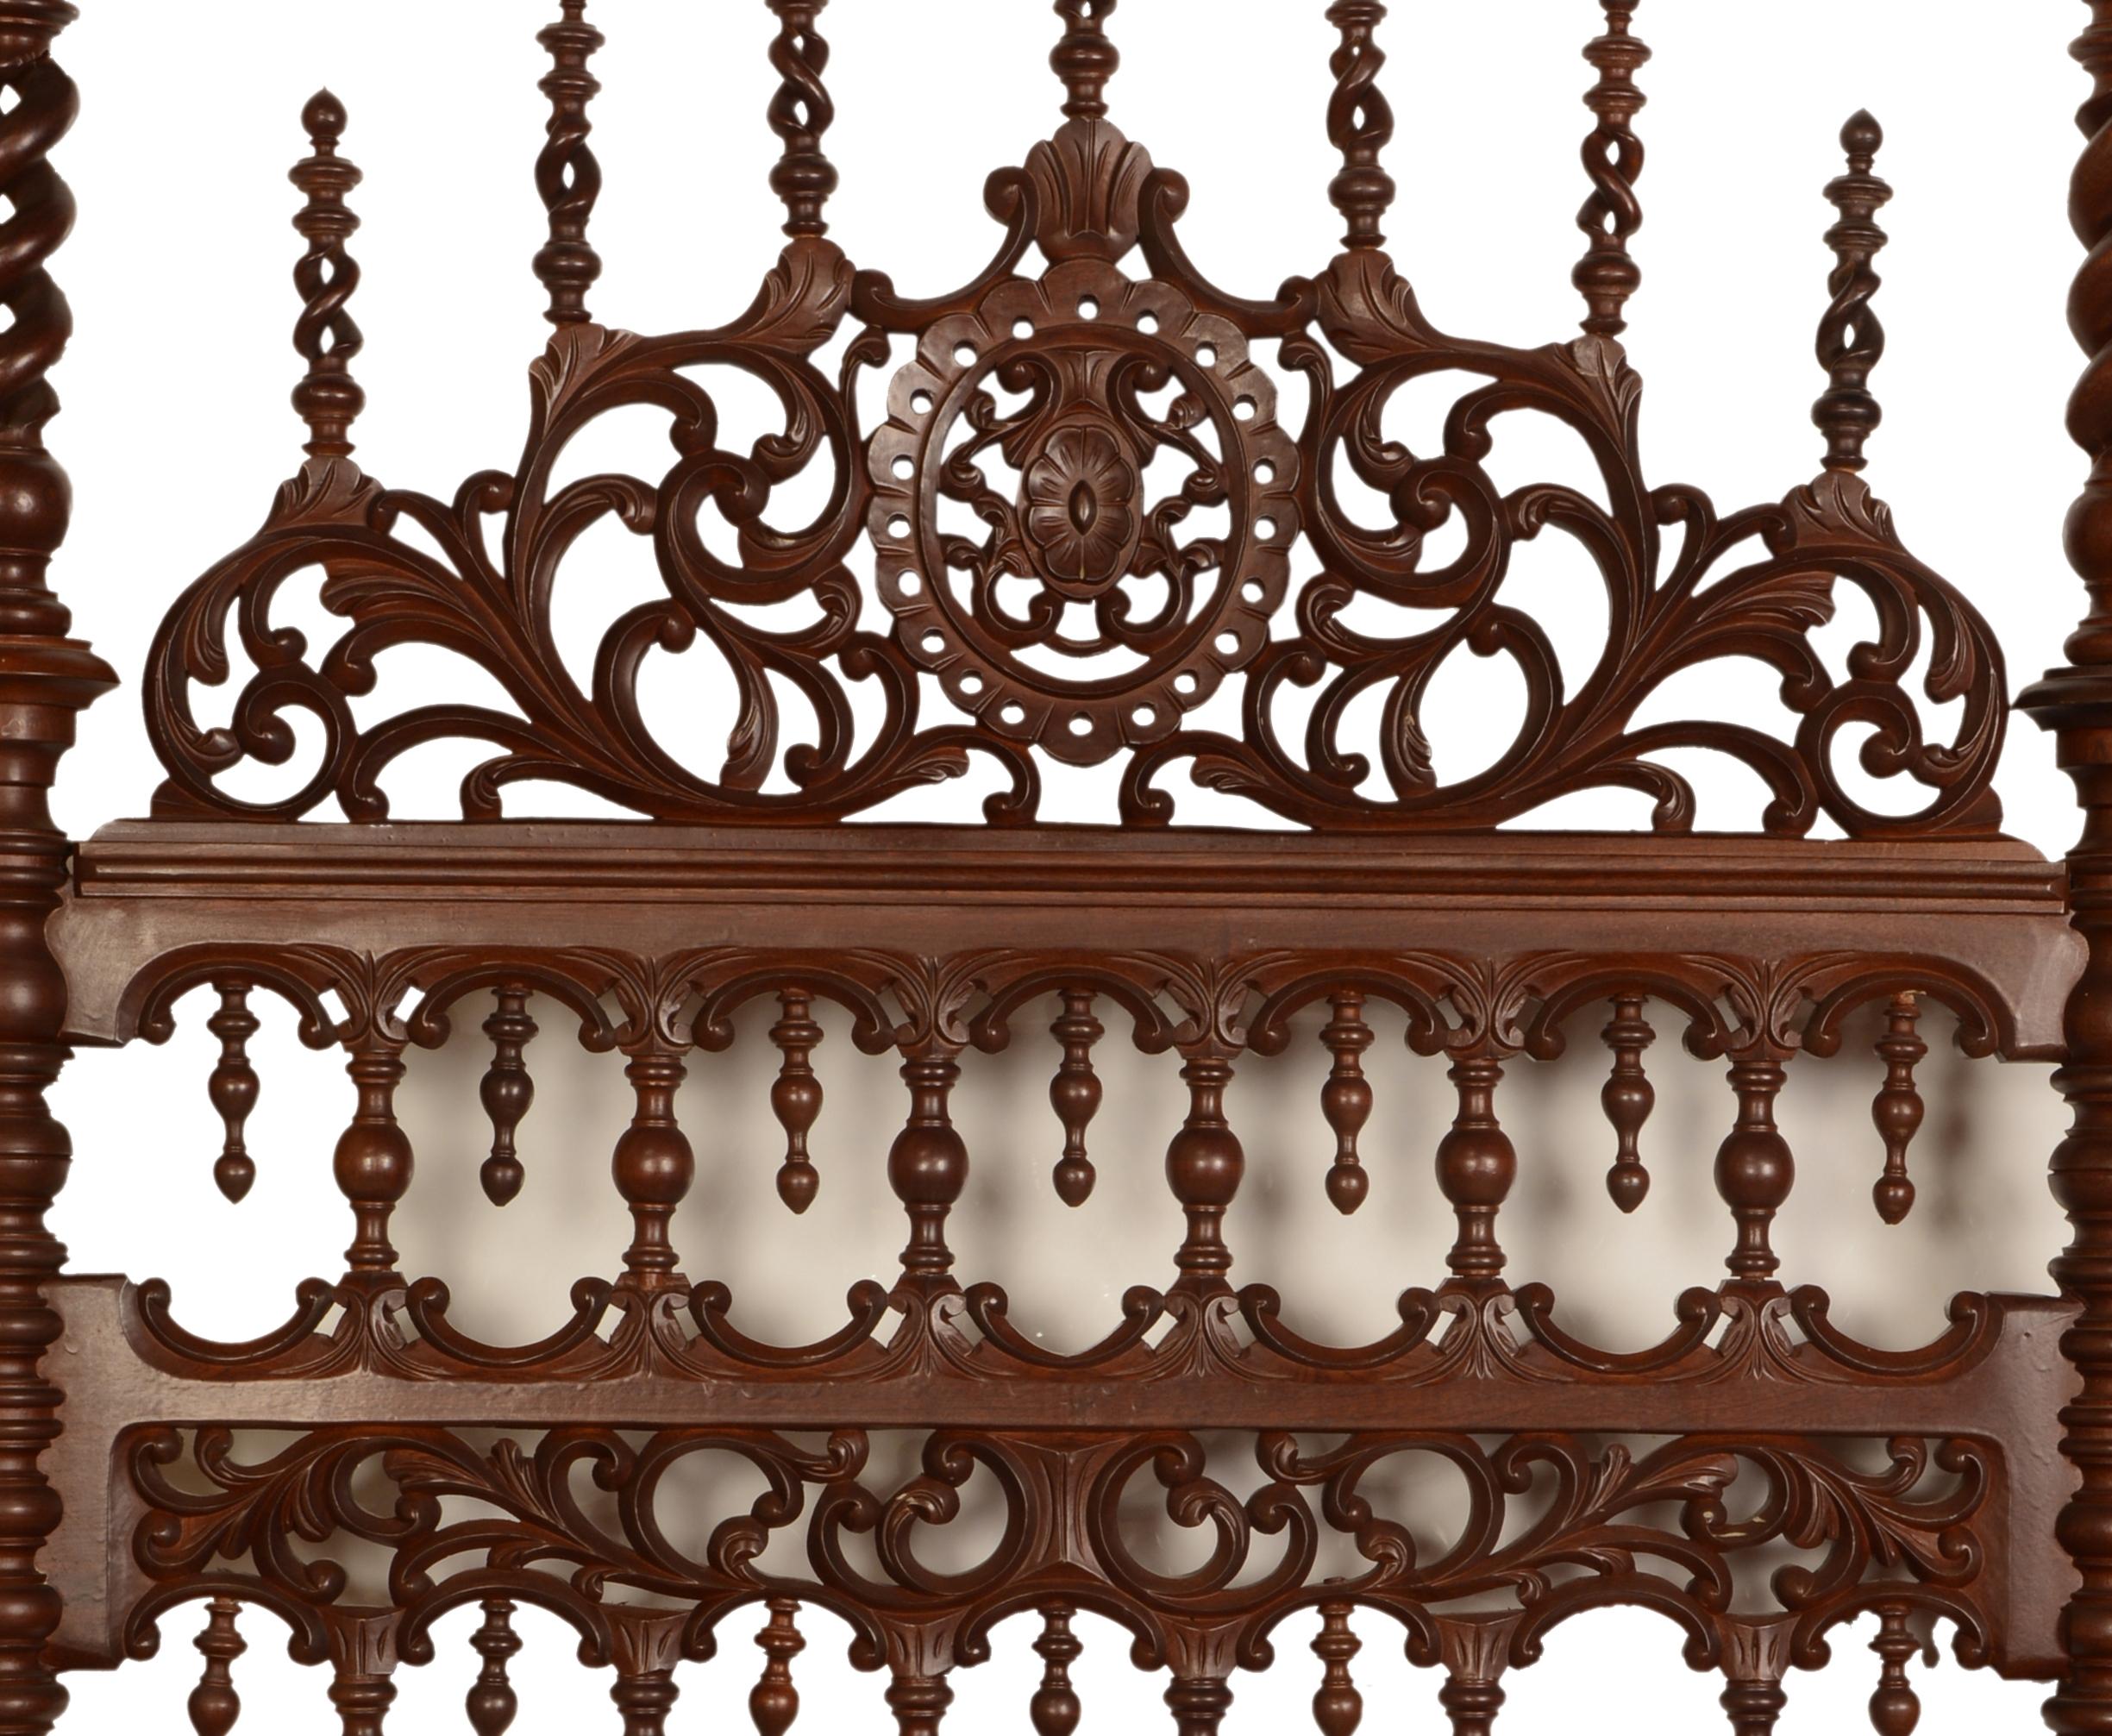 Baroque Revival Bed in Turned and Carved Wood, 20th Century